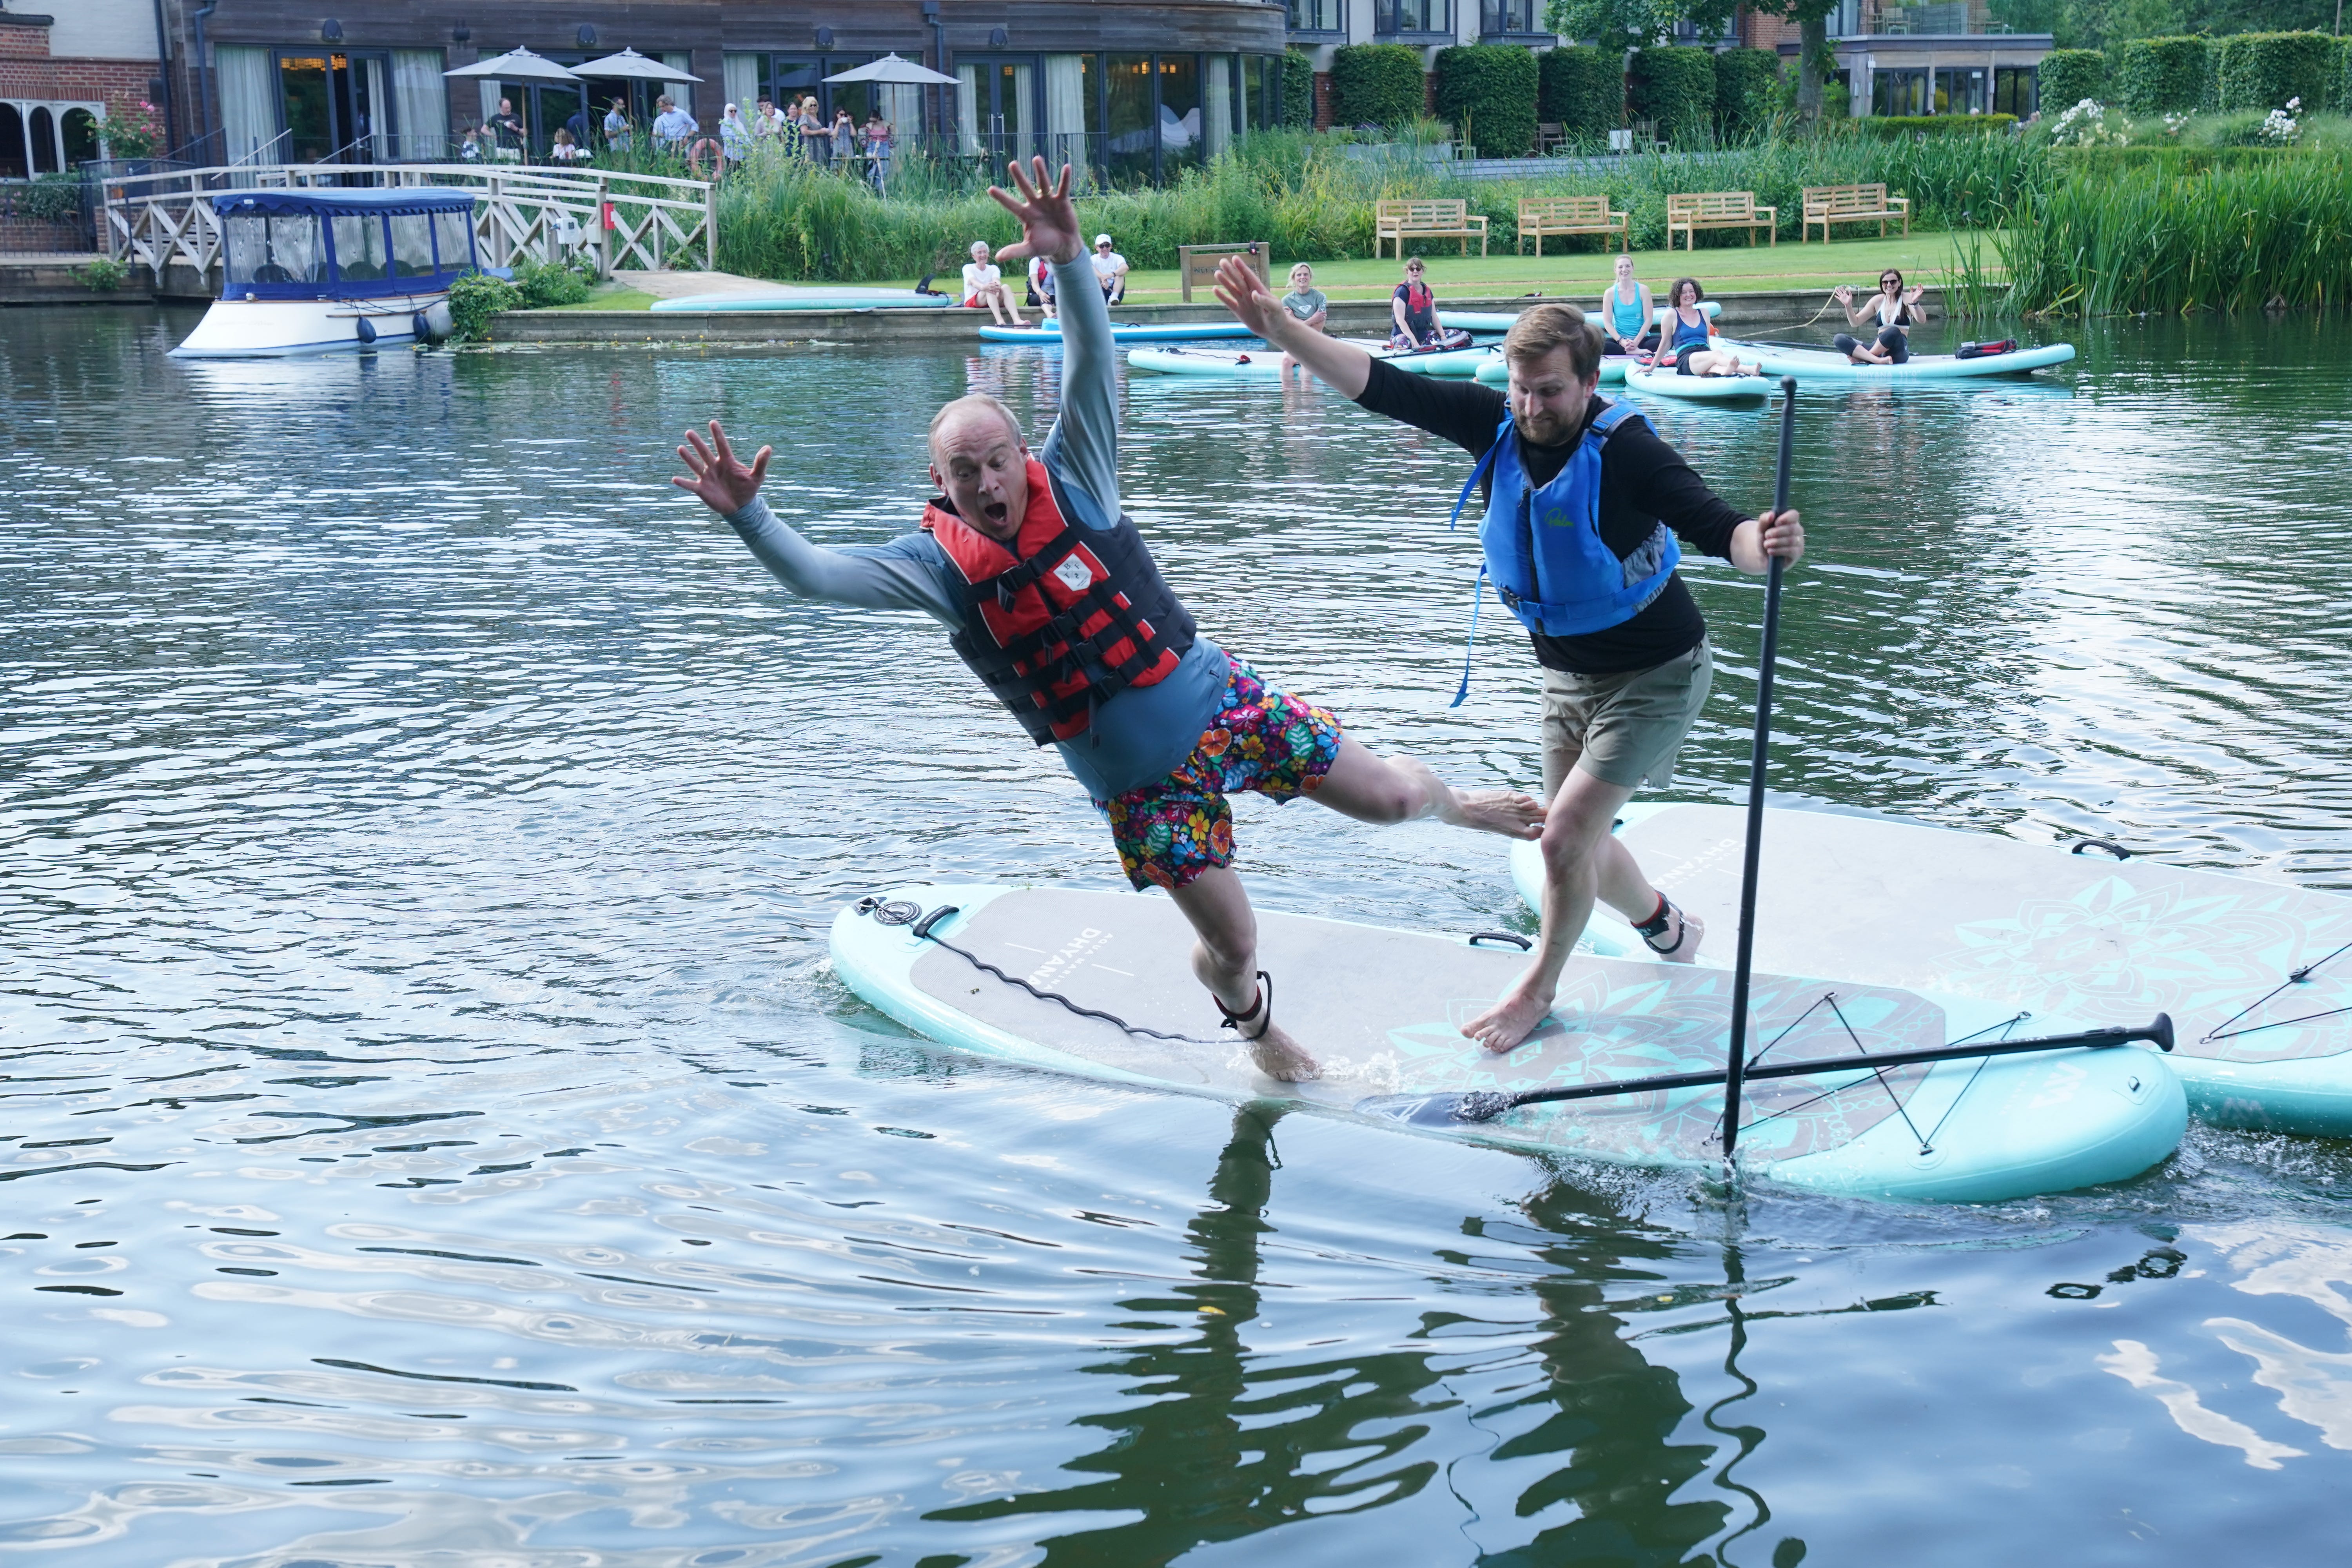 Liberal Democrat leader Sir Ed Davey falls off a paddleboard during his visit to Streatley, Berkshire, while on the election campaign trail (Jonathan Brady/PA)